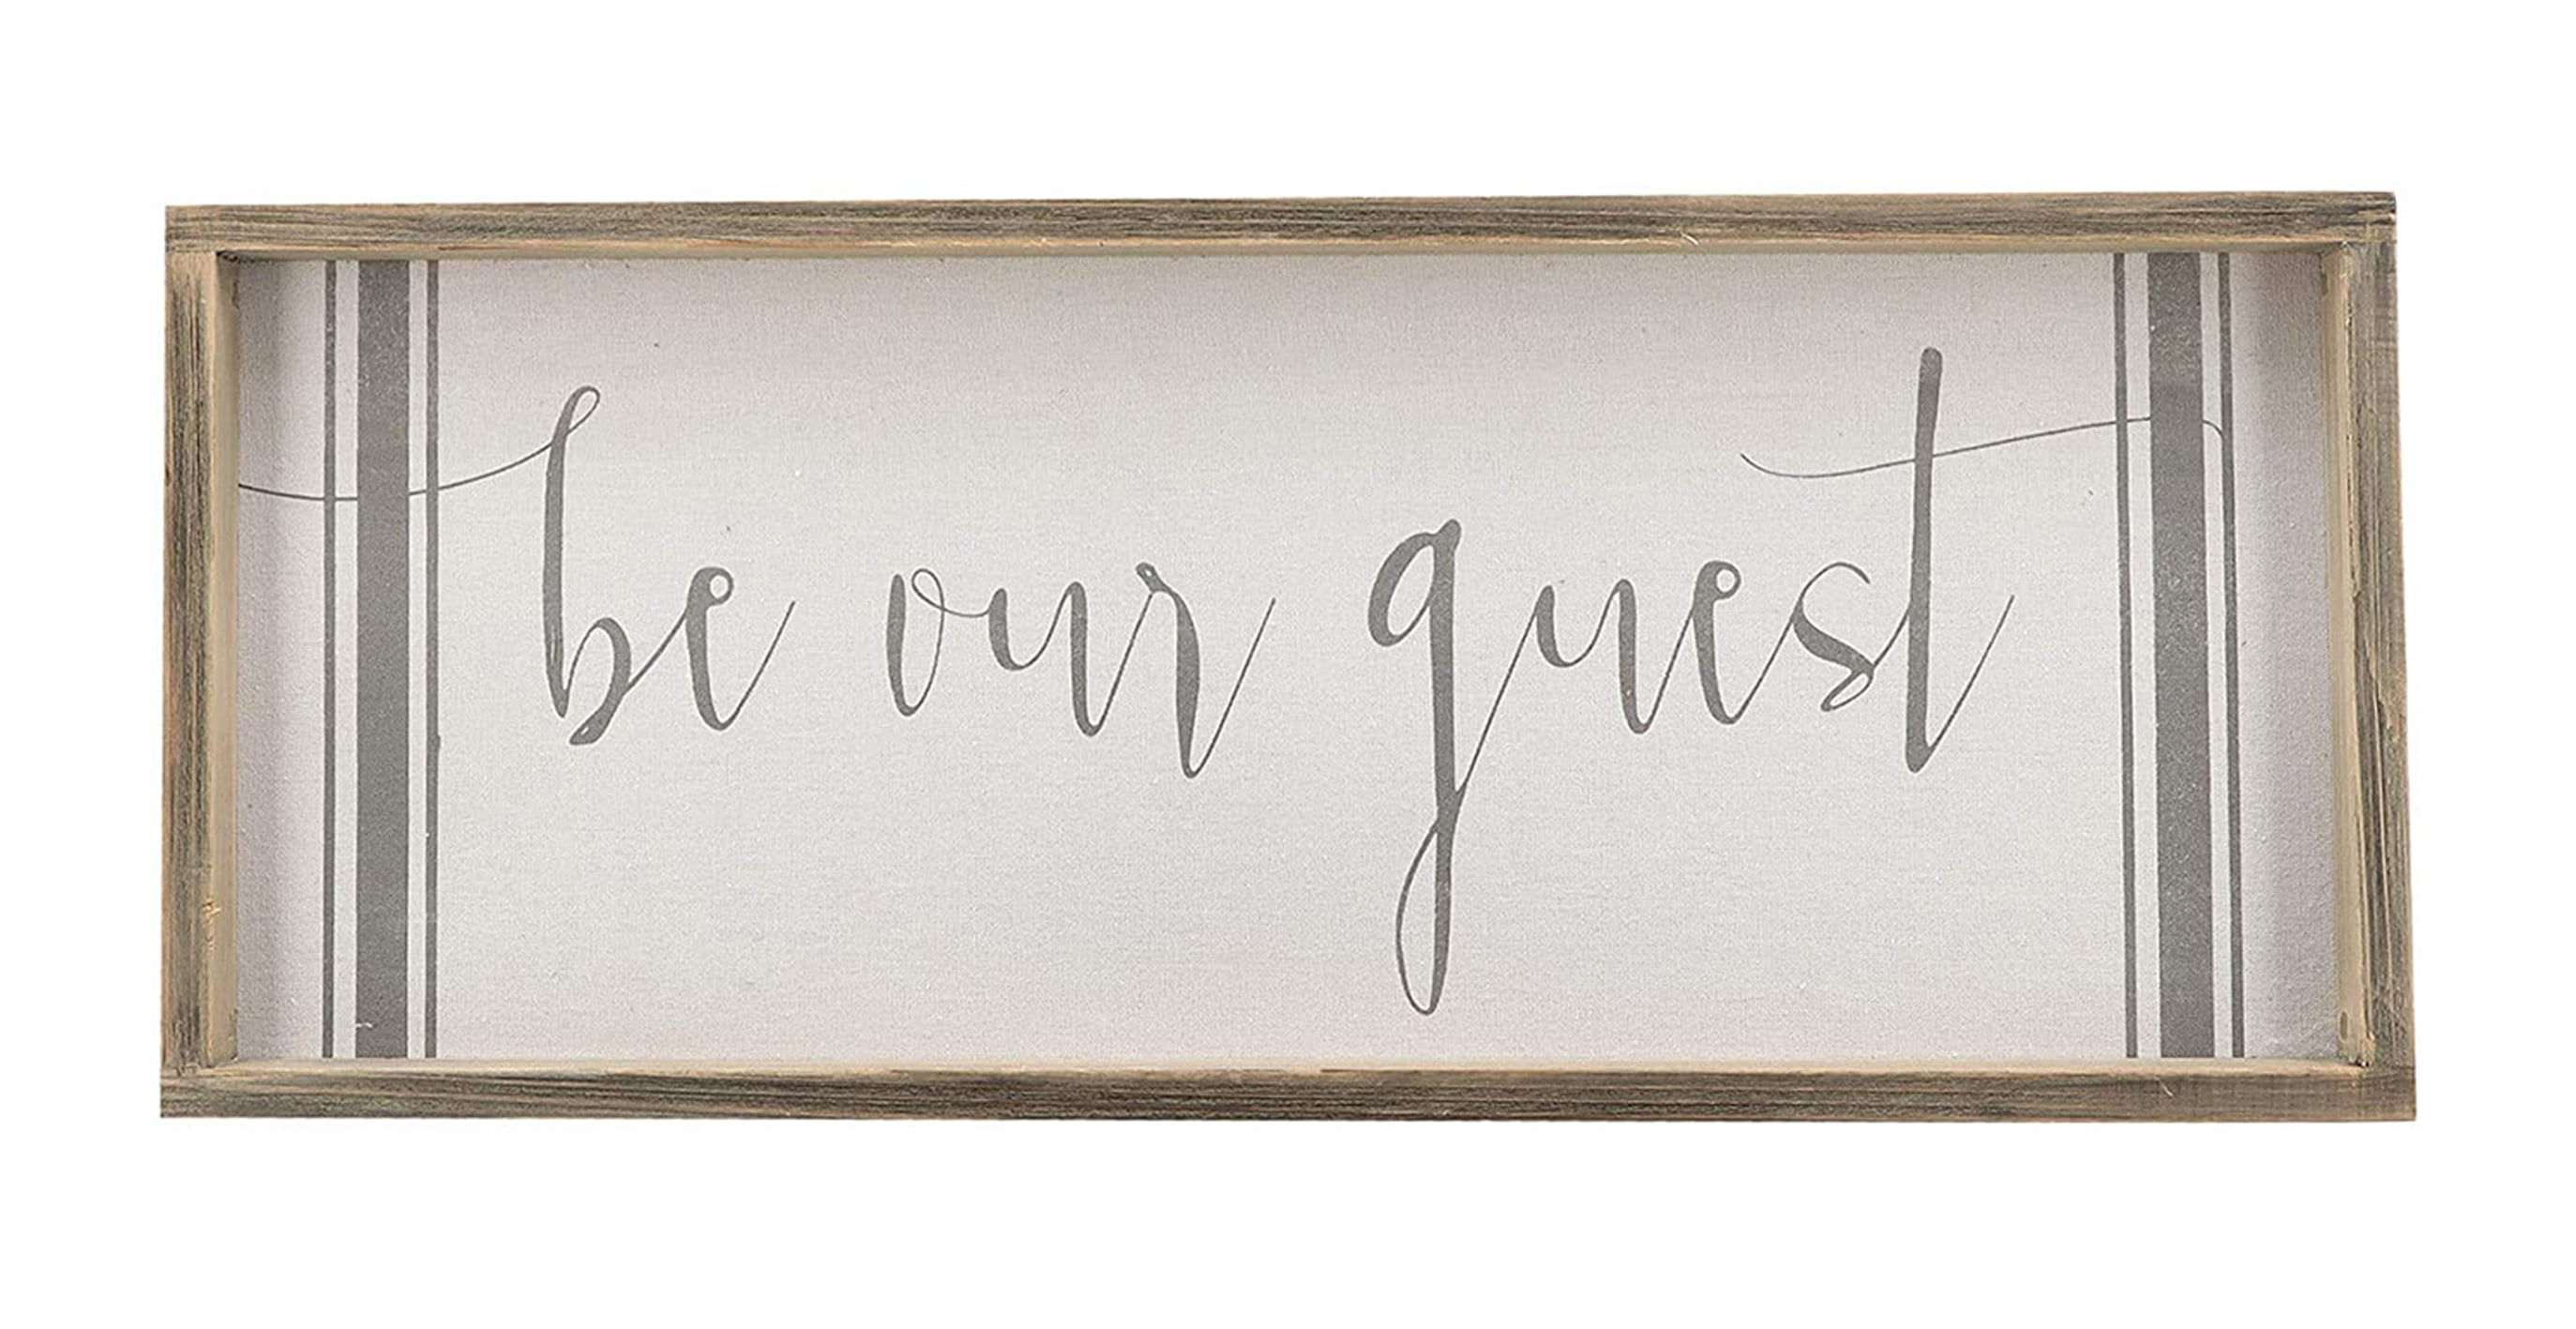 Guest Bedroom Wall Decor Be Our Guest Wooden Sign Home Decor Rustic Farmhouse Decor Framed Vinyl Wall Art Decal Modern Farmhouse Sign